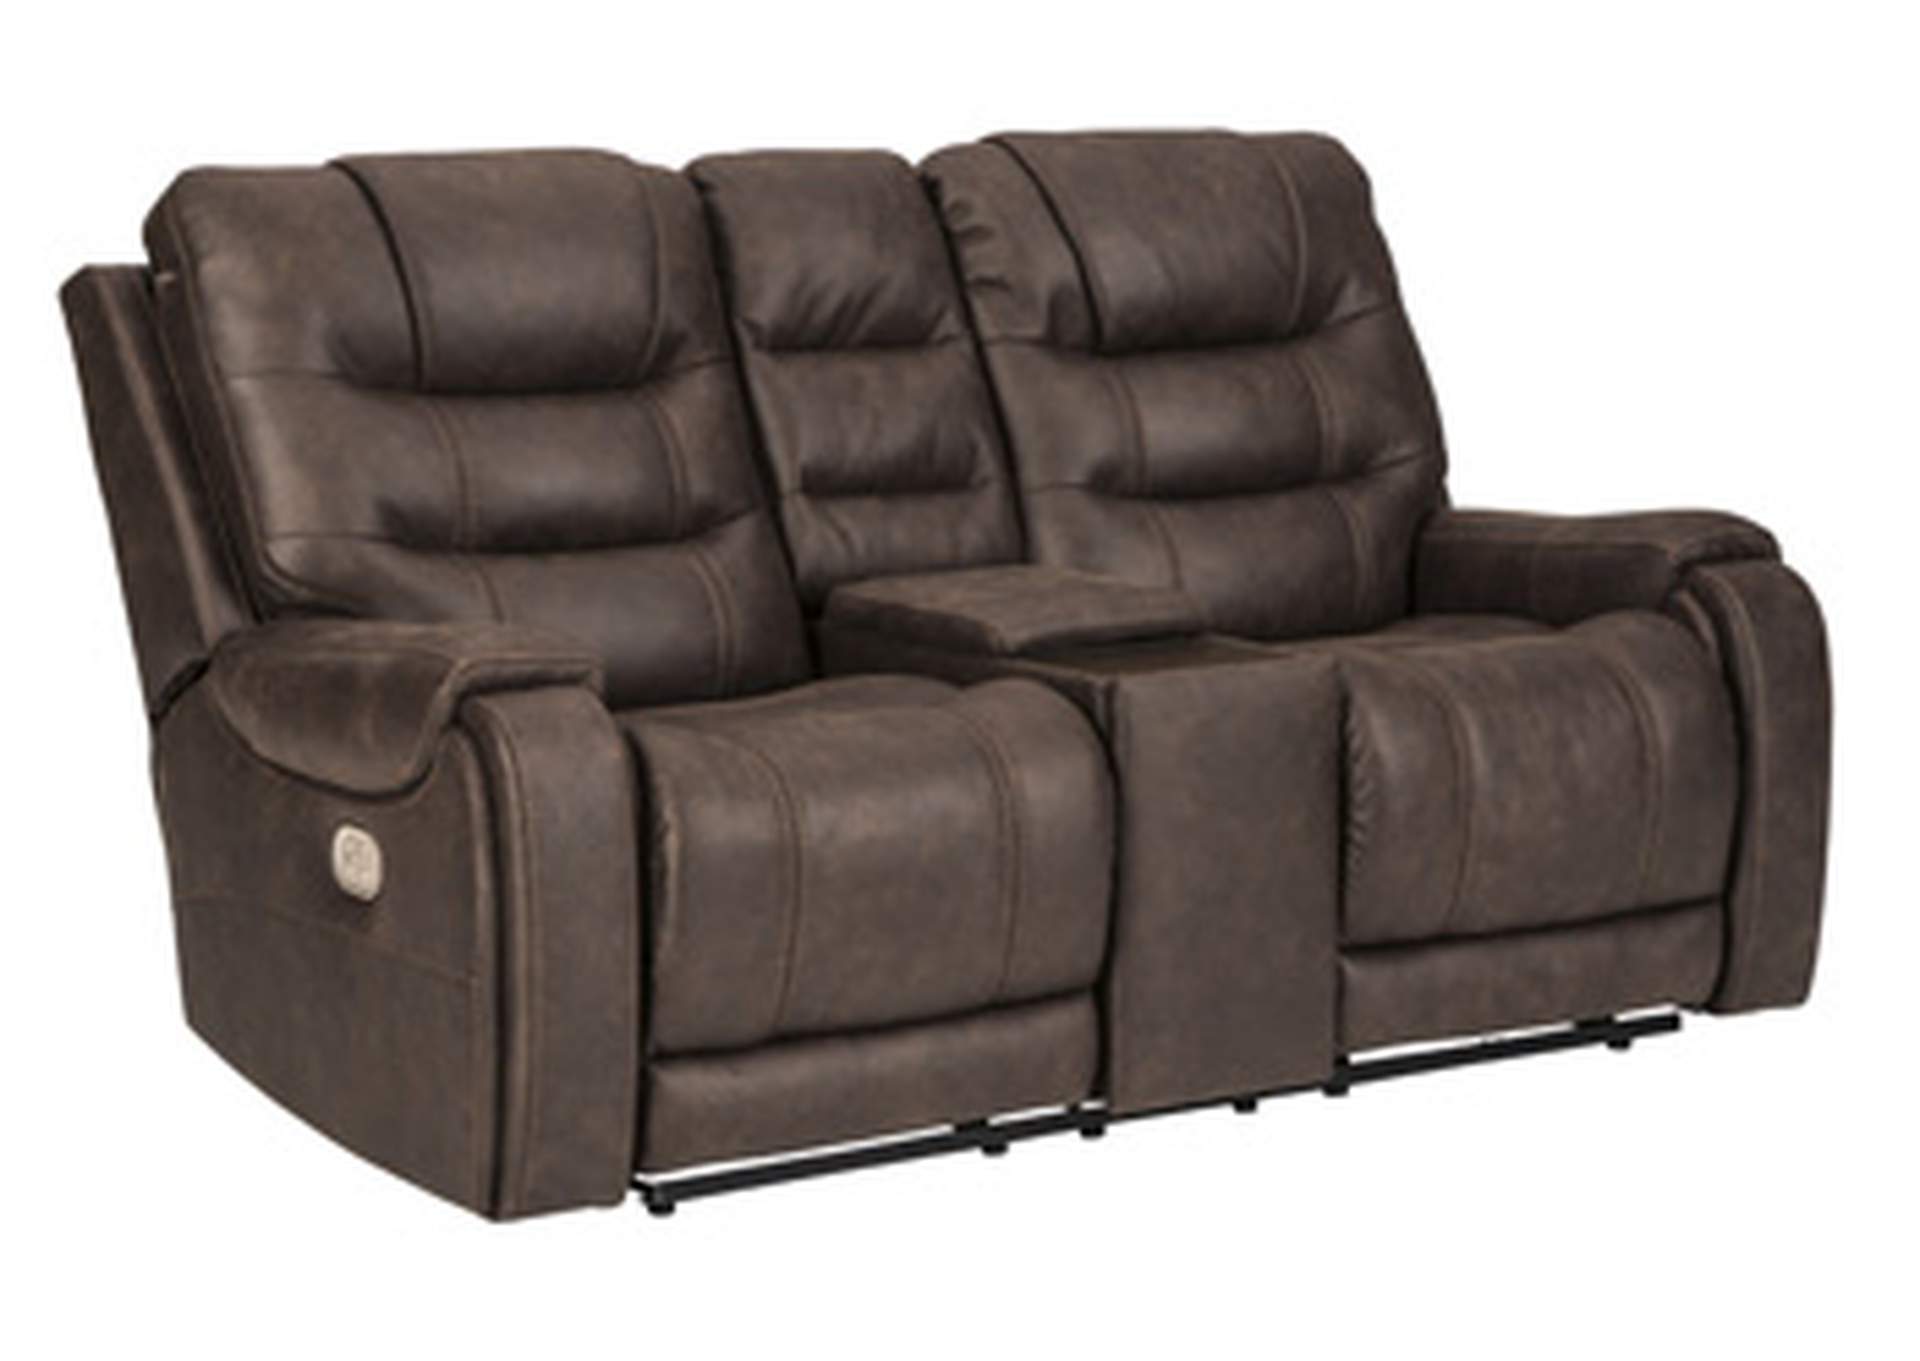 Yacolt Power Reclining Loveseat with Console,Signature Design By Ashley